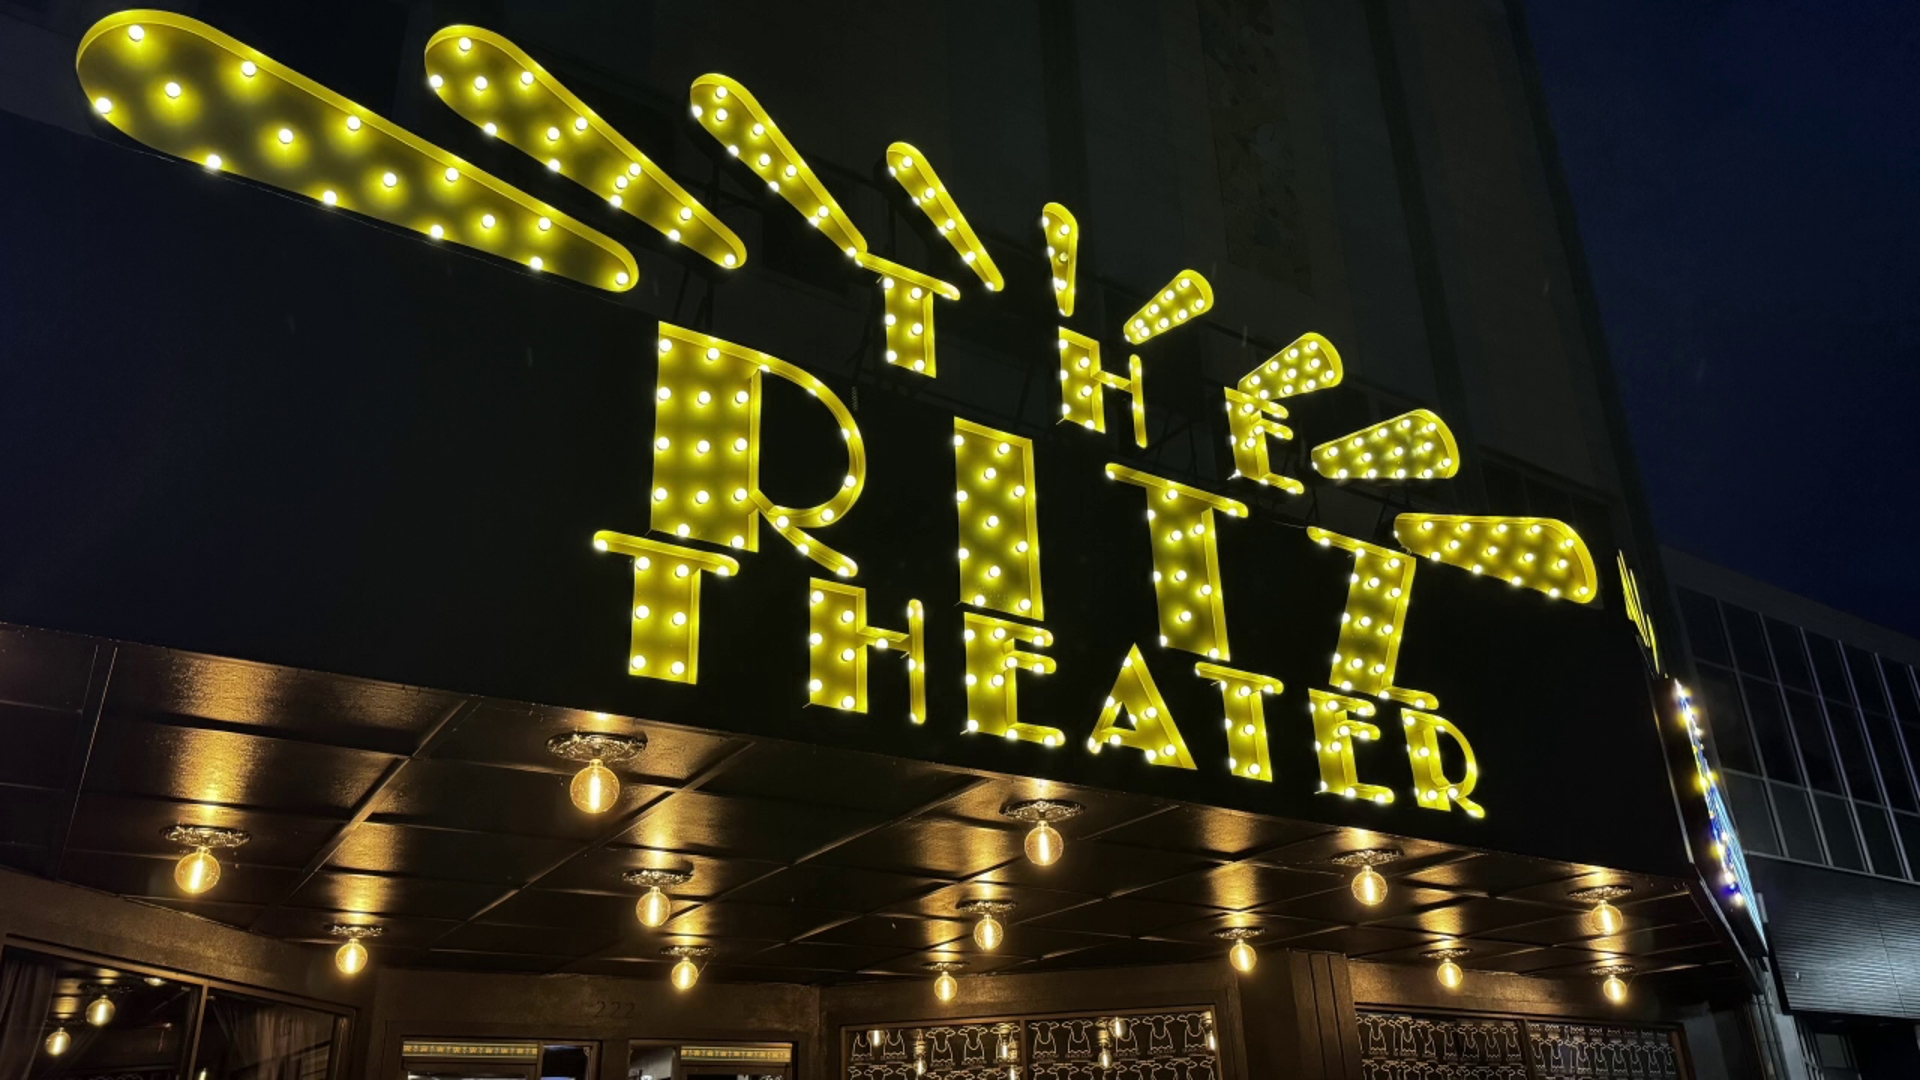 The Ritz Theater on Wyoming Avenue in downtown Scranton is revamped, revitalized, and will have its grand opening this weekend.